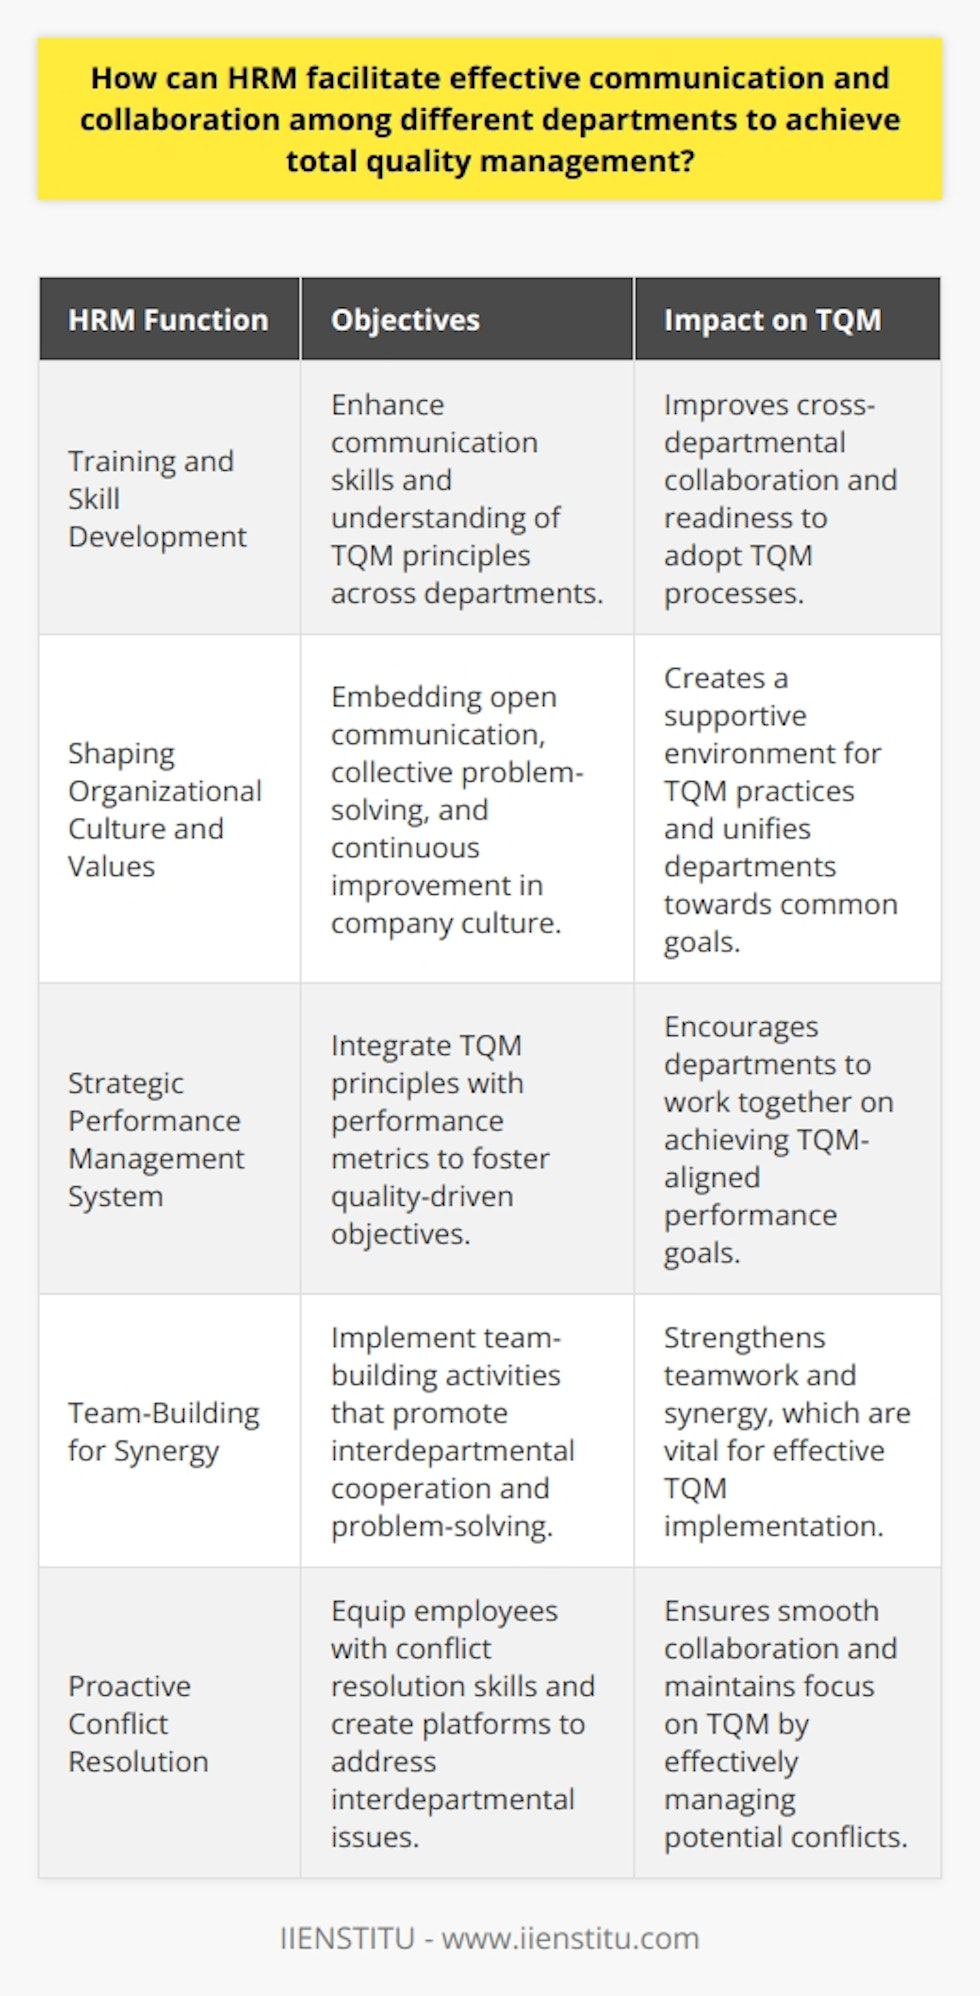 The incorporation of Total Quality Management (TQM) within the corporate framework significantly influences the competitiveness and efficiency of an organization. Fundamental to TQM's success is the seamless communication and collaboration amongst various departments, a process intricately tied to the adeptness of Human Resource Management (HRM) in executing its roles. HRM acts as the bridge between departments, ensuring alignment towards common goals and fostering an environment conducive to the principles of TQM.**Training and Skill Development**HRM is pivotal in identifying and addressing the training needs of the workforce to align with TQM objectives. It orchestrates comprehensive training programs that are tailored to enhance communication skills – an indispensable asset in cross-departmental interactions. Moreover, HRM introduces employees to TQM fundamentals and cross-training that fosters a better understanding of different departmental roles, thus breaking down communication silos.**Shaping Organizational Culture and Values**HRM takes charge of cultivating a company culture that prizes open communication, collective problem-solving, and continuous improvement—all cornerstones of TQM. HR professionals instill a sense of shared purpose and encourage departments to transcend their boundaries, fostering an environment where feedback is not only valued but sought after. By embedding values such as trust and cohesion into the organizational DNA, HRM carves out a collaborative ecosystem which is the bedrock of TQM.**Strategic Performance Management System**Performance metrics and assessment criteria designed by HRM can significantly influence the collaborative climate. HRM can intertwine TQM tenets with performance measures, thus encouraging departments to pursue quality-driven goals collaboratively. Recognizing and rewarding contributions to interdepartmental projects and quality improvements can further incentivize integration and collective input.**Team-Building for Synergy**HRM's role extends to constructing a solid foundation for teamwork through diverse team-building initiatives. These activities are strategically orchestrated not merely for entertainment but to simulate scenarios that require collective problem-solving and communication, reflective of workplace challenges. This fosters a spirit of unity and acquaints departments with the intricacies of working as part of an interdependent whole.**Proactive Conflict Resolution**HRM is also the custodian of conflict management policies that preemptively mitigate the risk of disputes that could disrupt collaboration. By equipping employees with conflict resolution skills and providing platforms for airing and addressing grievances, HRM ensures that operational frictions do not escalate and impede TQM efforts. An open-door policy for addressing interdepartmental issues and a systematic approach to conflict resolution are essential tools in HRM's arsenal.In essence, HRM's role in cultivating effective communication and collaboration between departments for TQM cannot be overstated. By initiating continuous professional development, shaping culture, instituting strategic performance measures, fostering team unity, and managing conflicts, HRM not only enhances the capability of an organization to implement TQM but also embeds these principles deeply within the organizational fabric. Through such ongoing endeavors, HRM stands as a key protagonist in the narrative of TQM success.